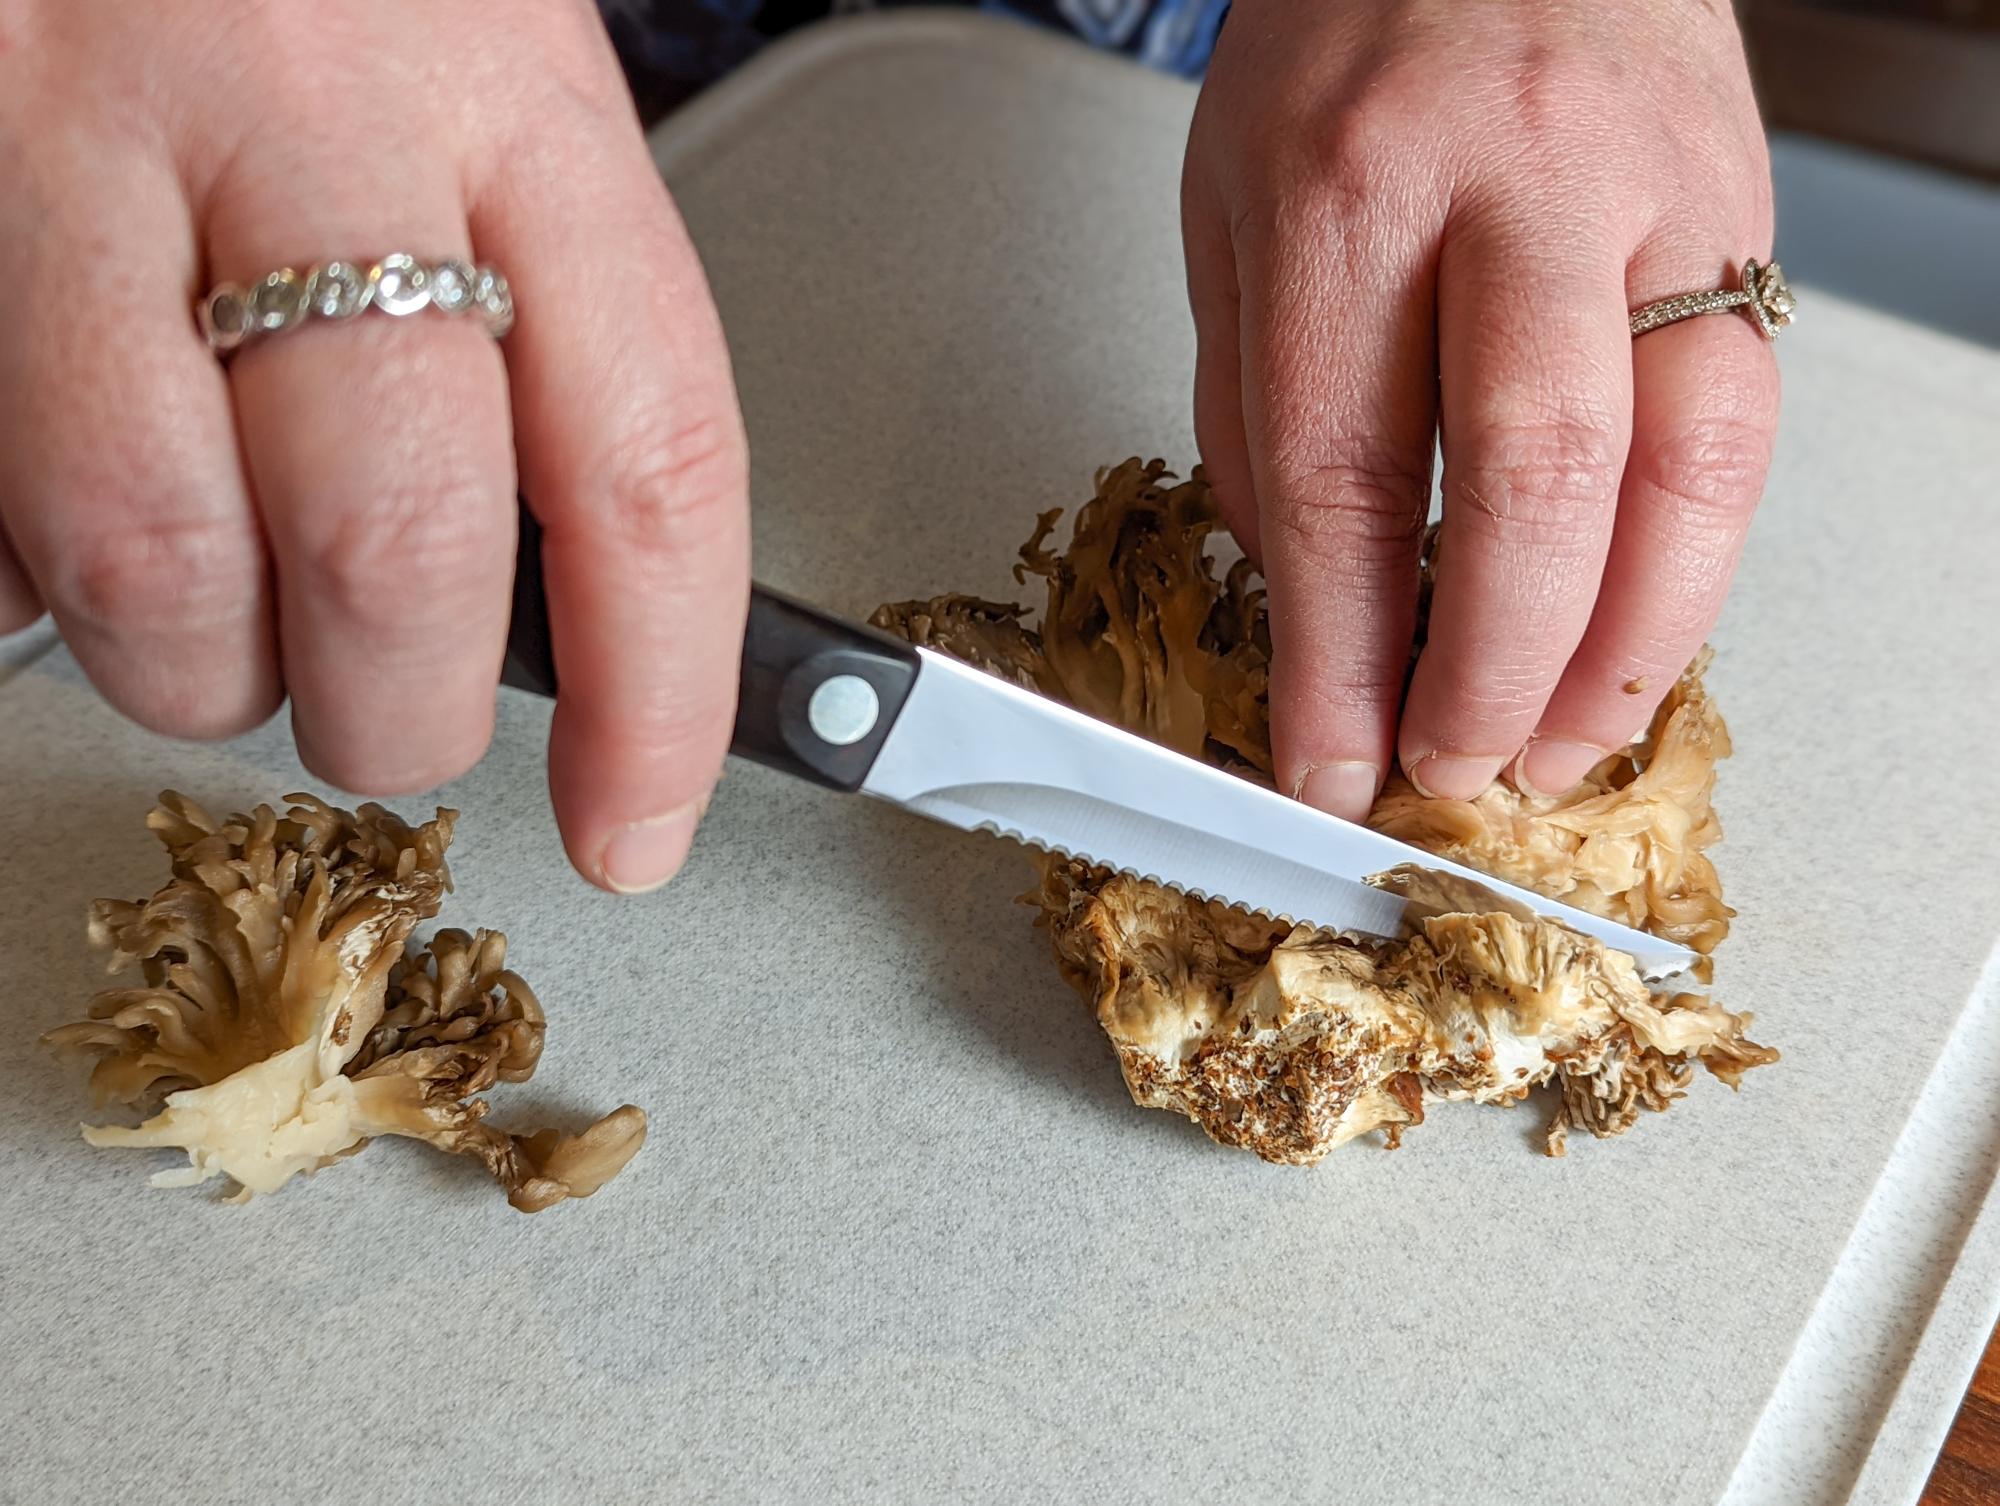 Slicing the mushrooms with a Trimmer.